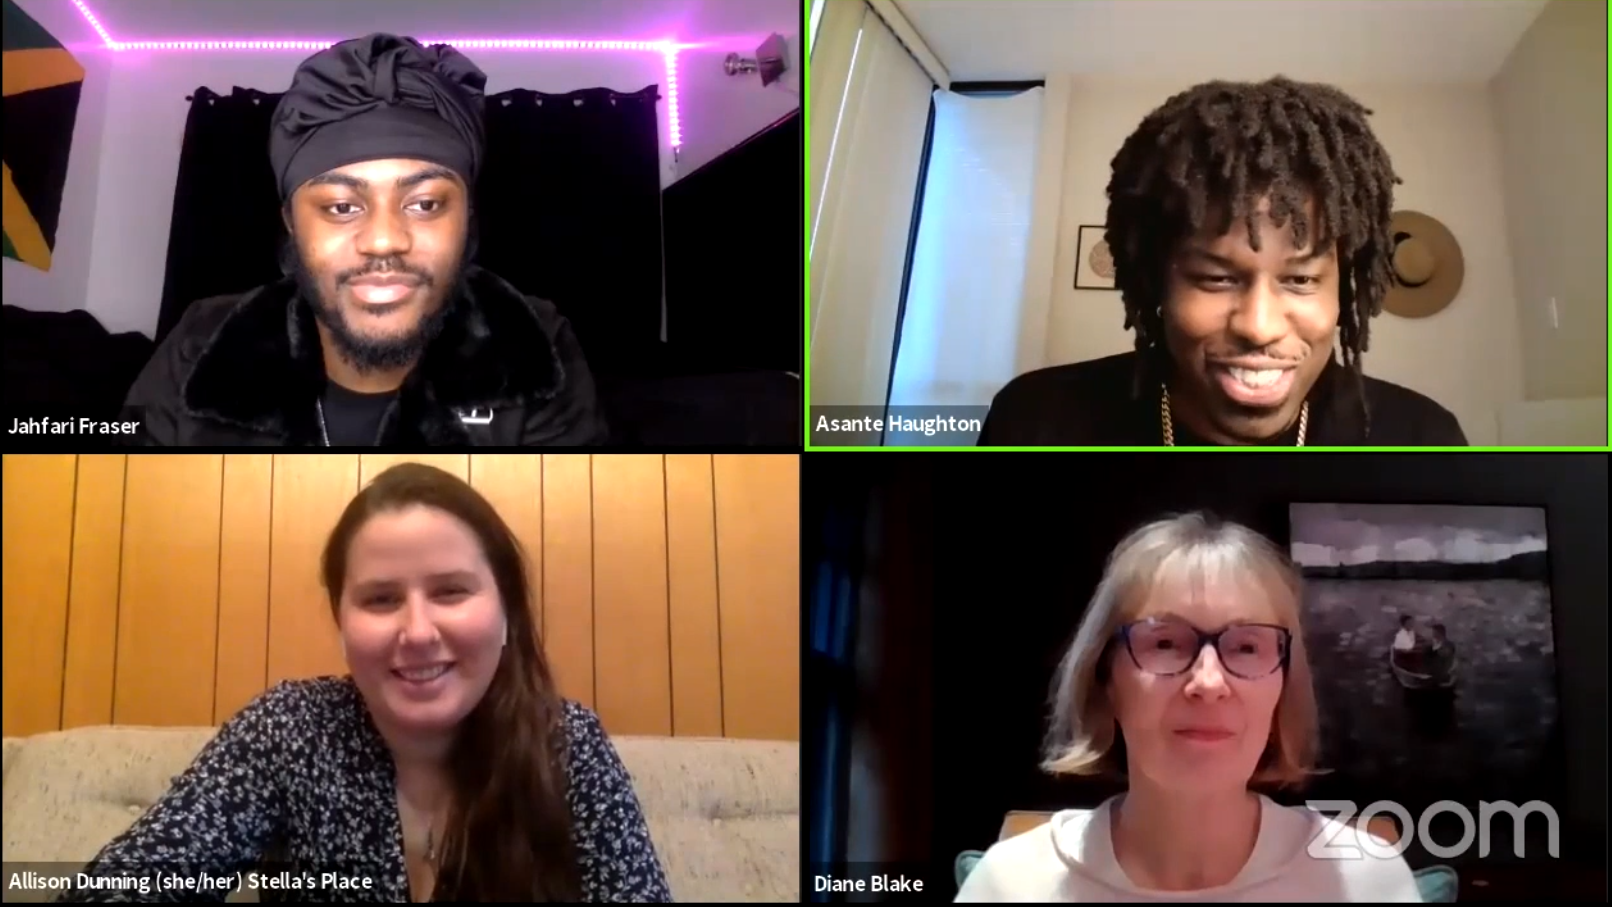 A screenshot of 4 people on a zoom panel discussion, all smiling.